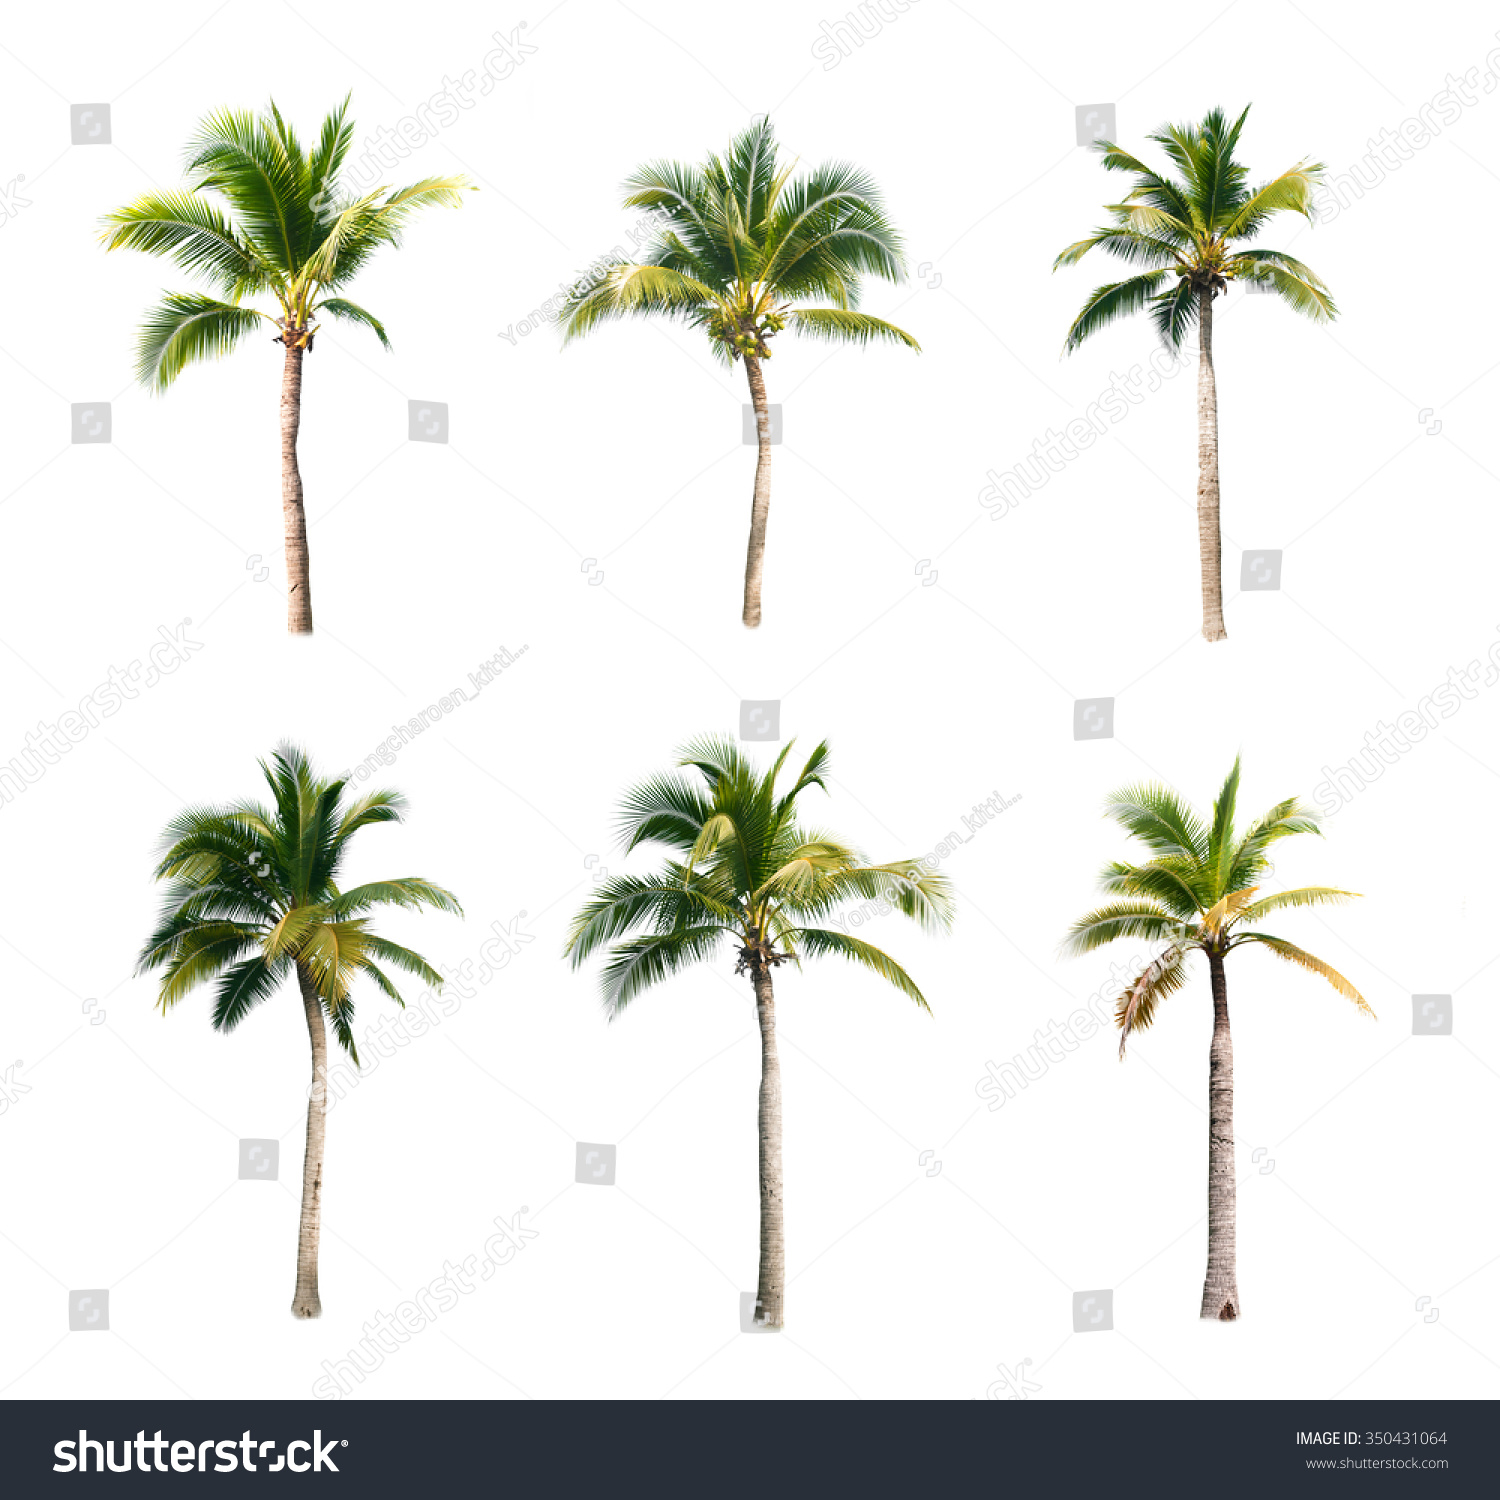 Coconut Trees On White Background Stock Photo 350431064 | Shutterstock